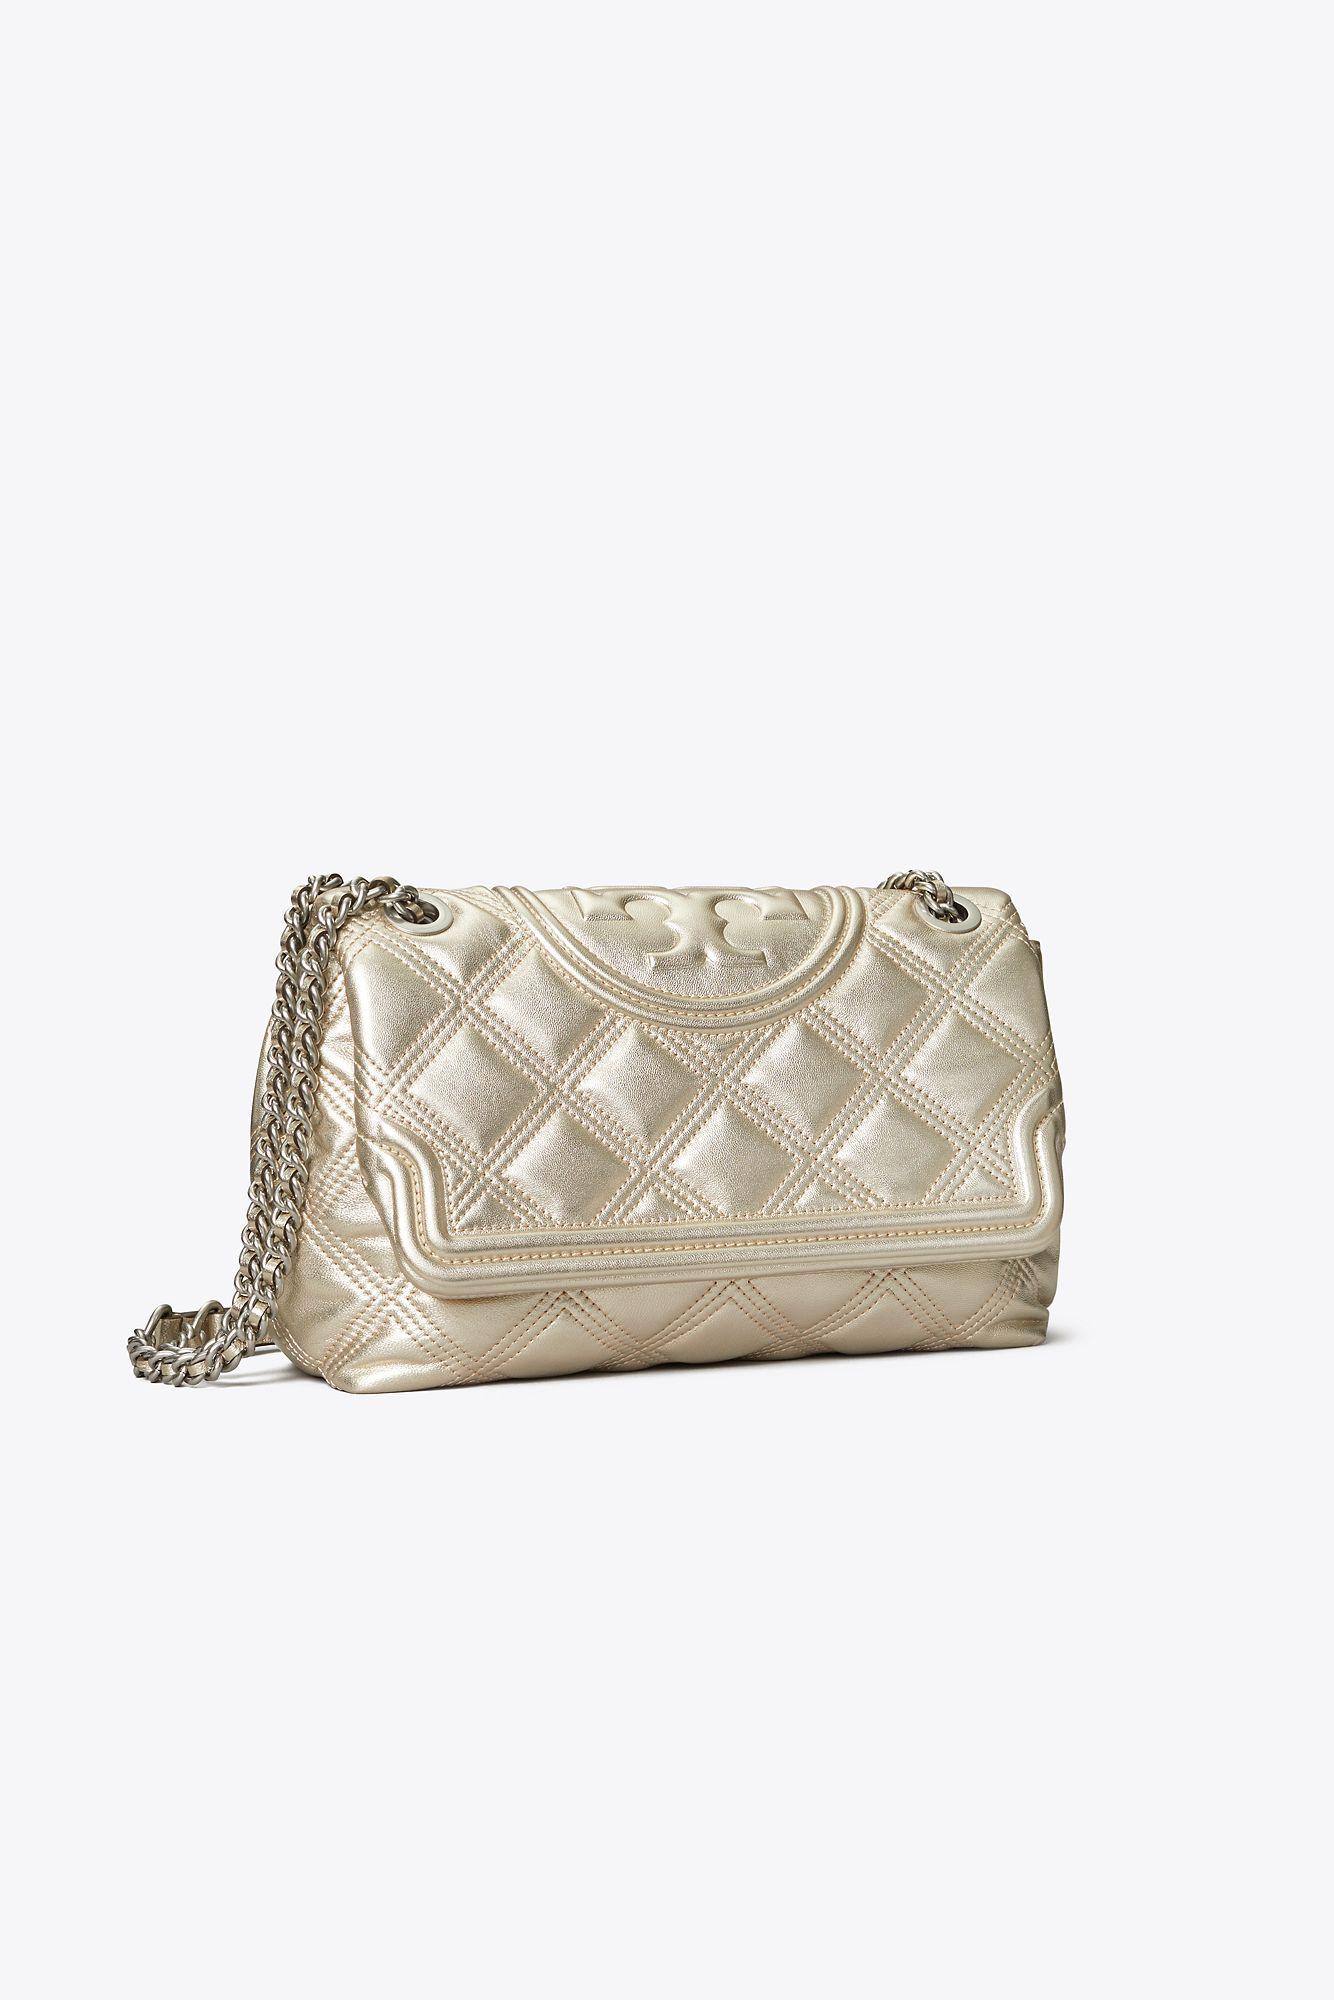 $798 tory Burch Fleming Soft Convertible Shoulder Bag Green White leather -  VELCH TECHNOLOGY